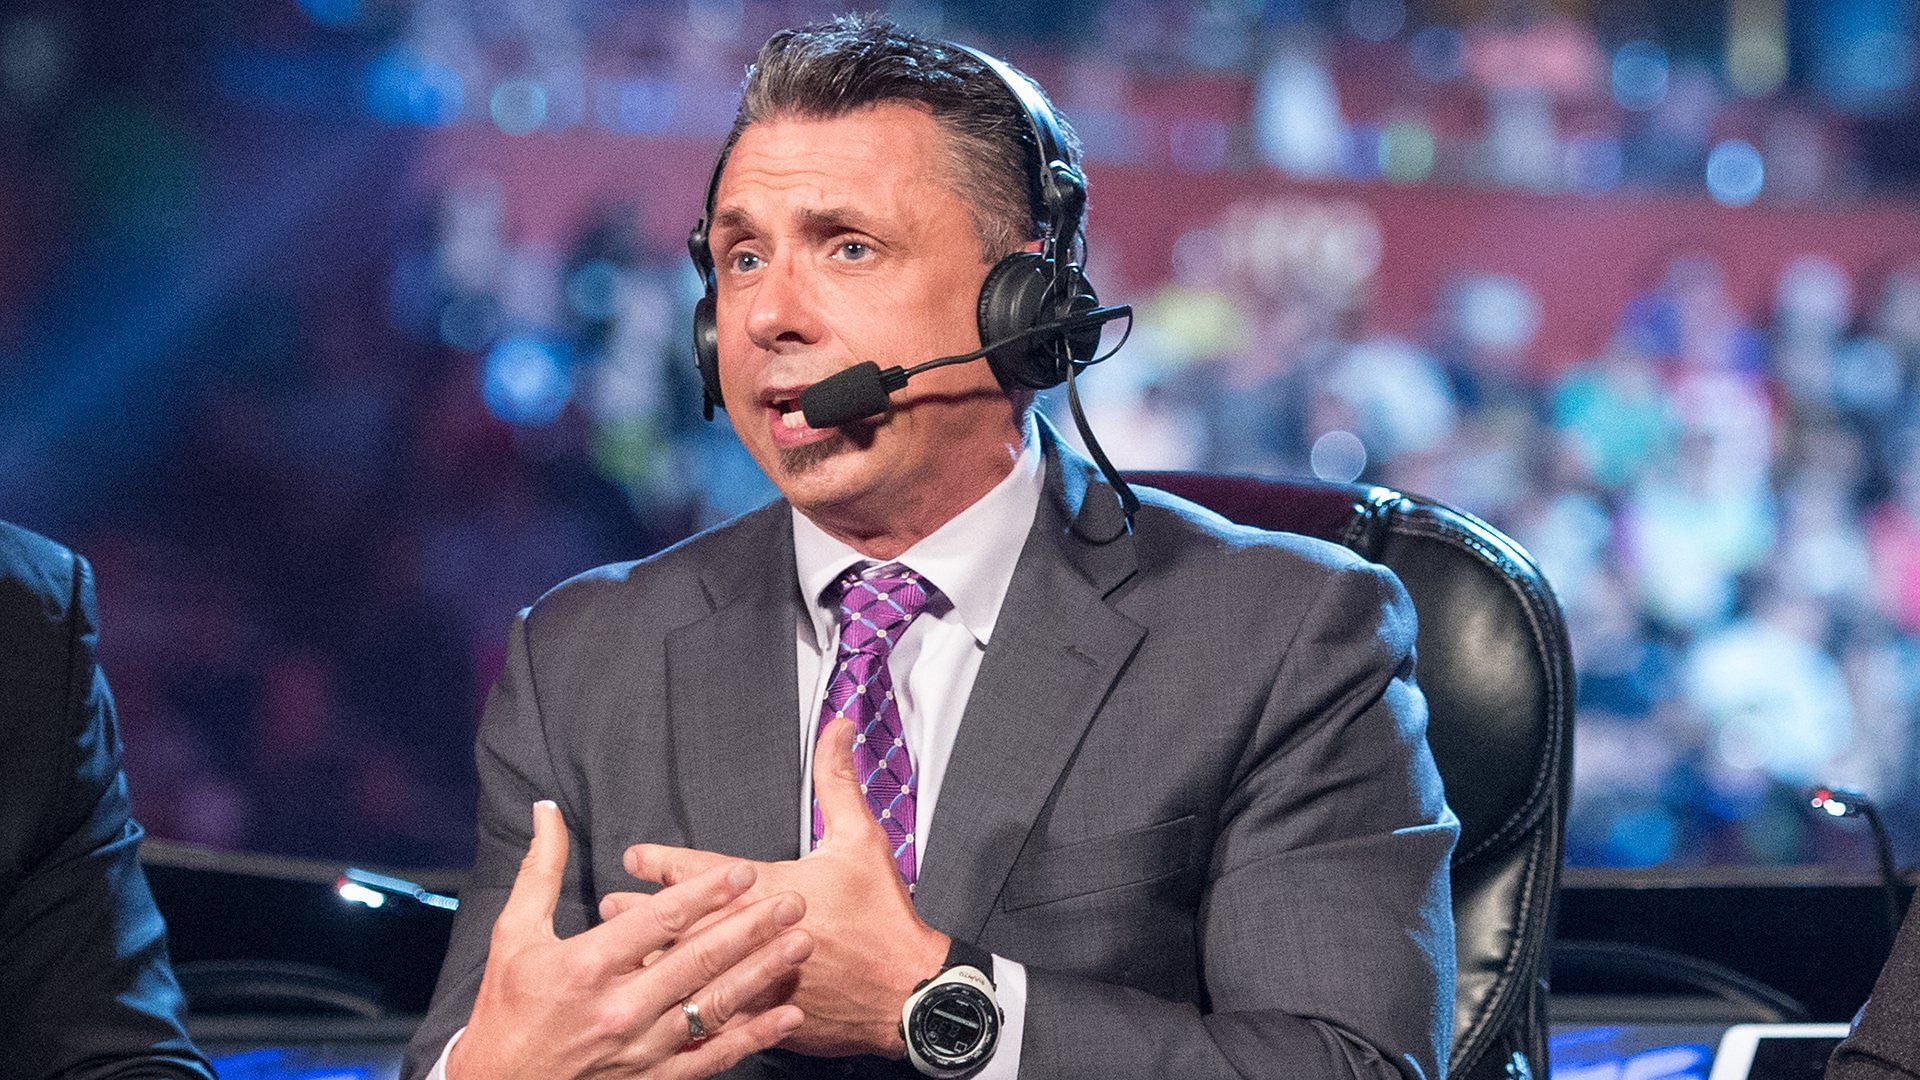 Michael Cole does commentary as The Voice of WWE